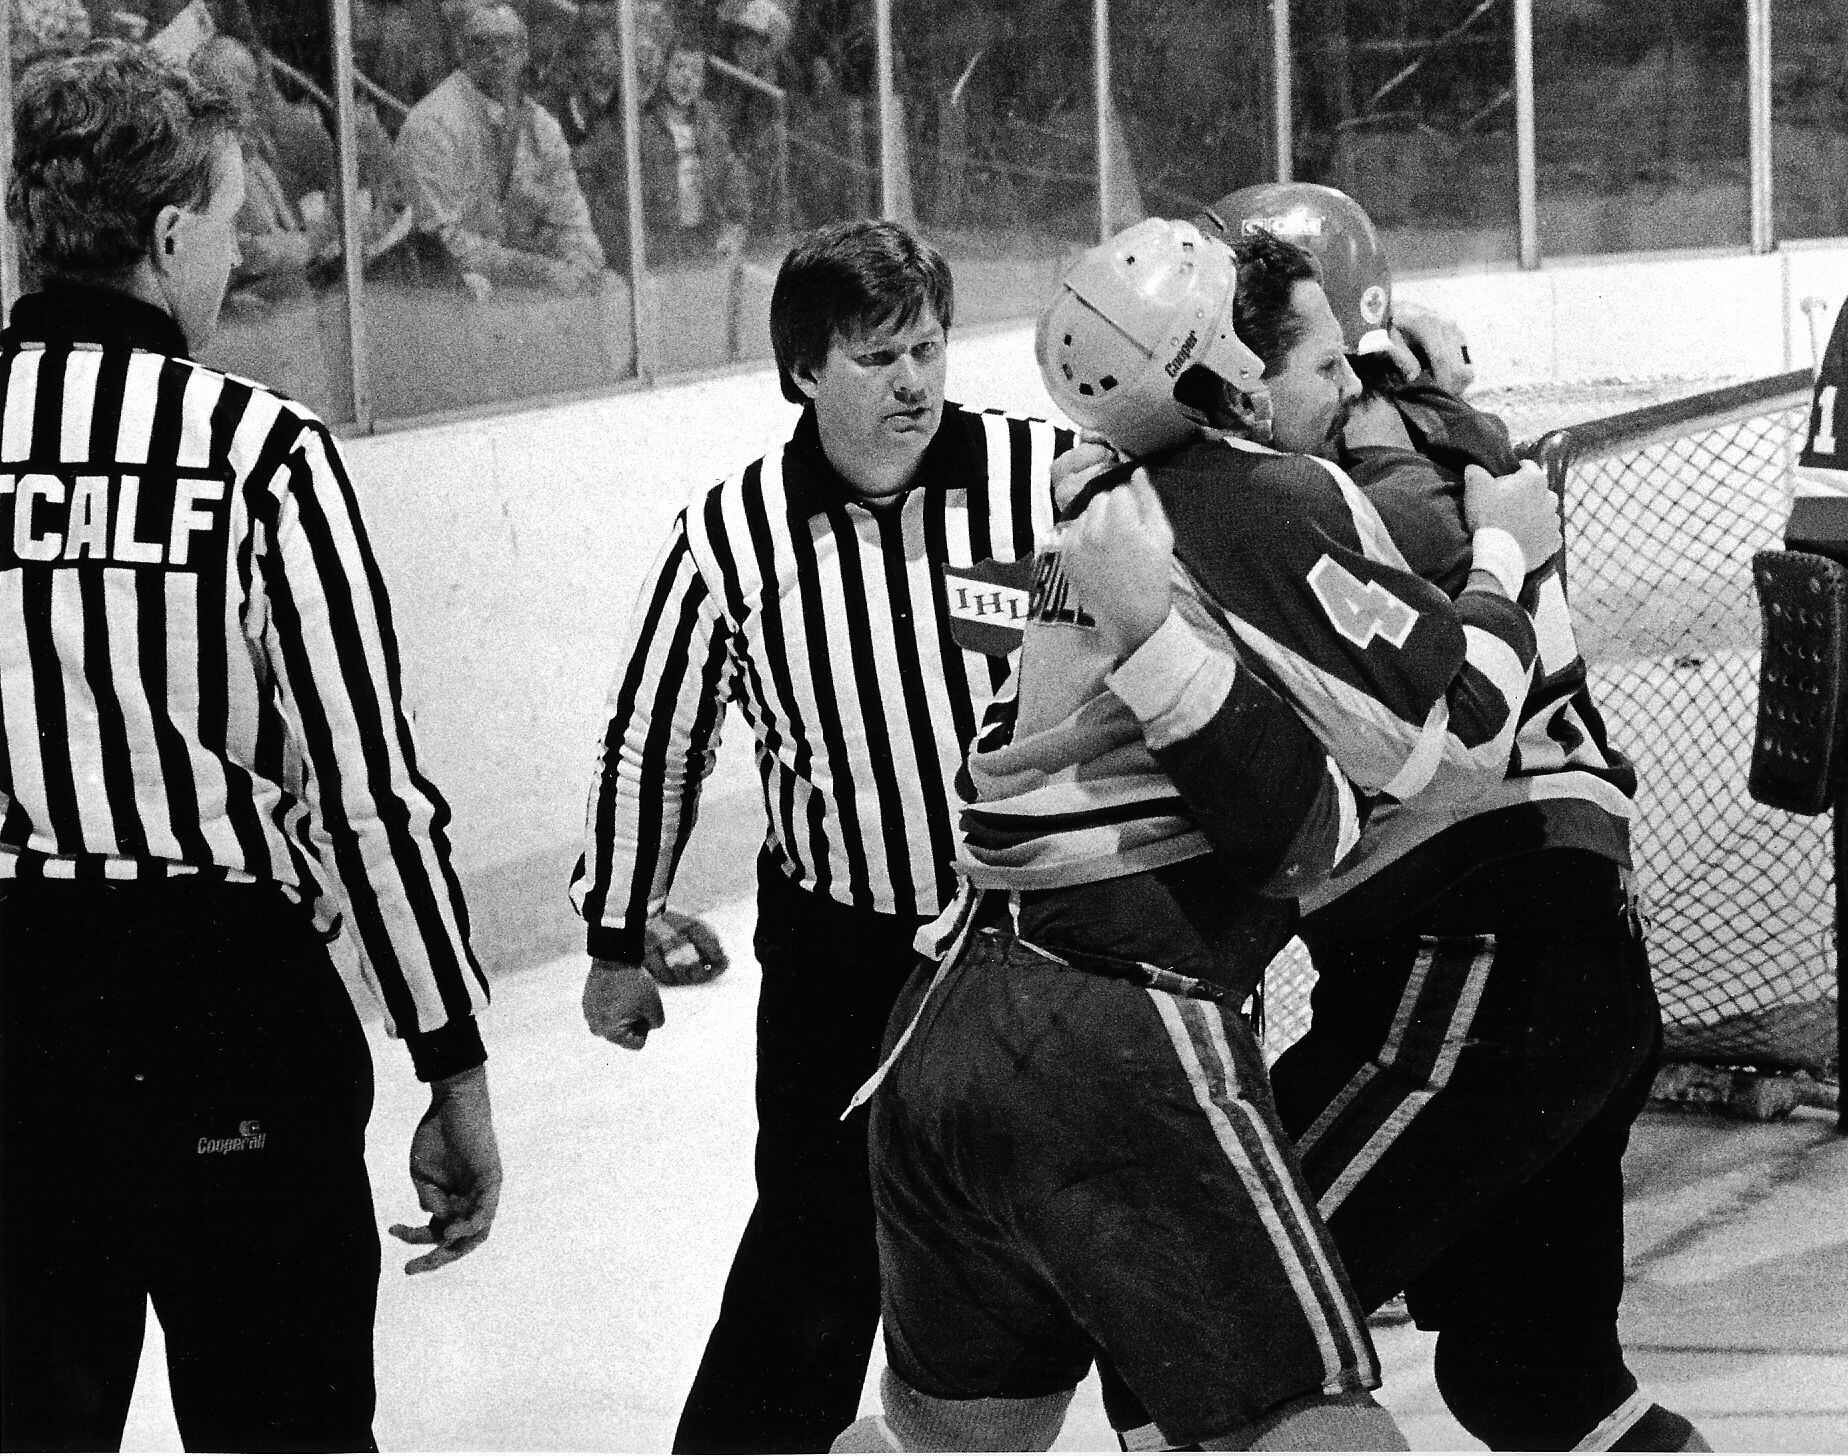 (Brian Acord) Salt Lake Golden Eagles enforcer Randy Turnbull (4) fights with an opposing player on the ice during a game in 1987.